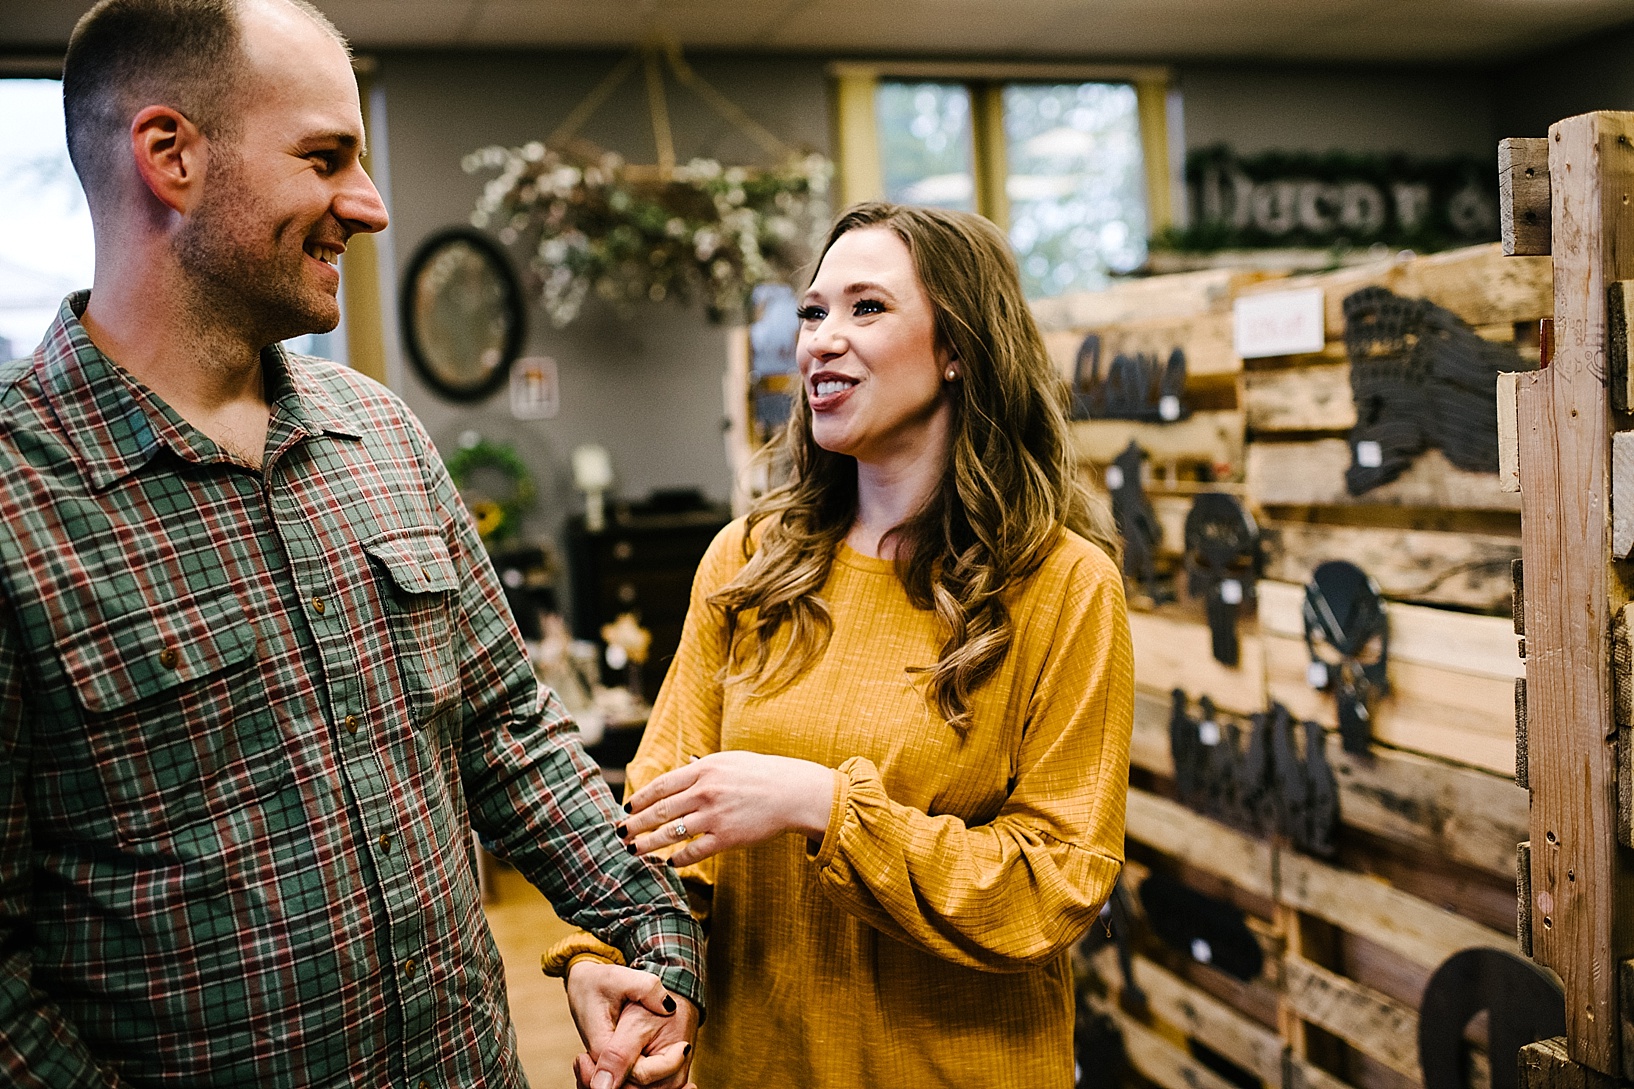 antique shop and brewery engagement session Carlyn K Photography